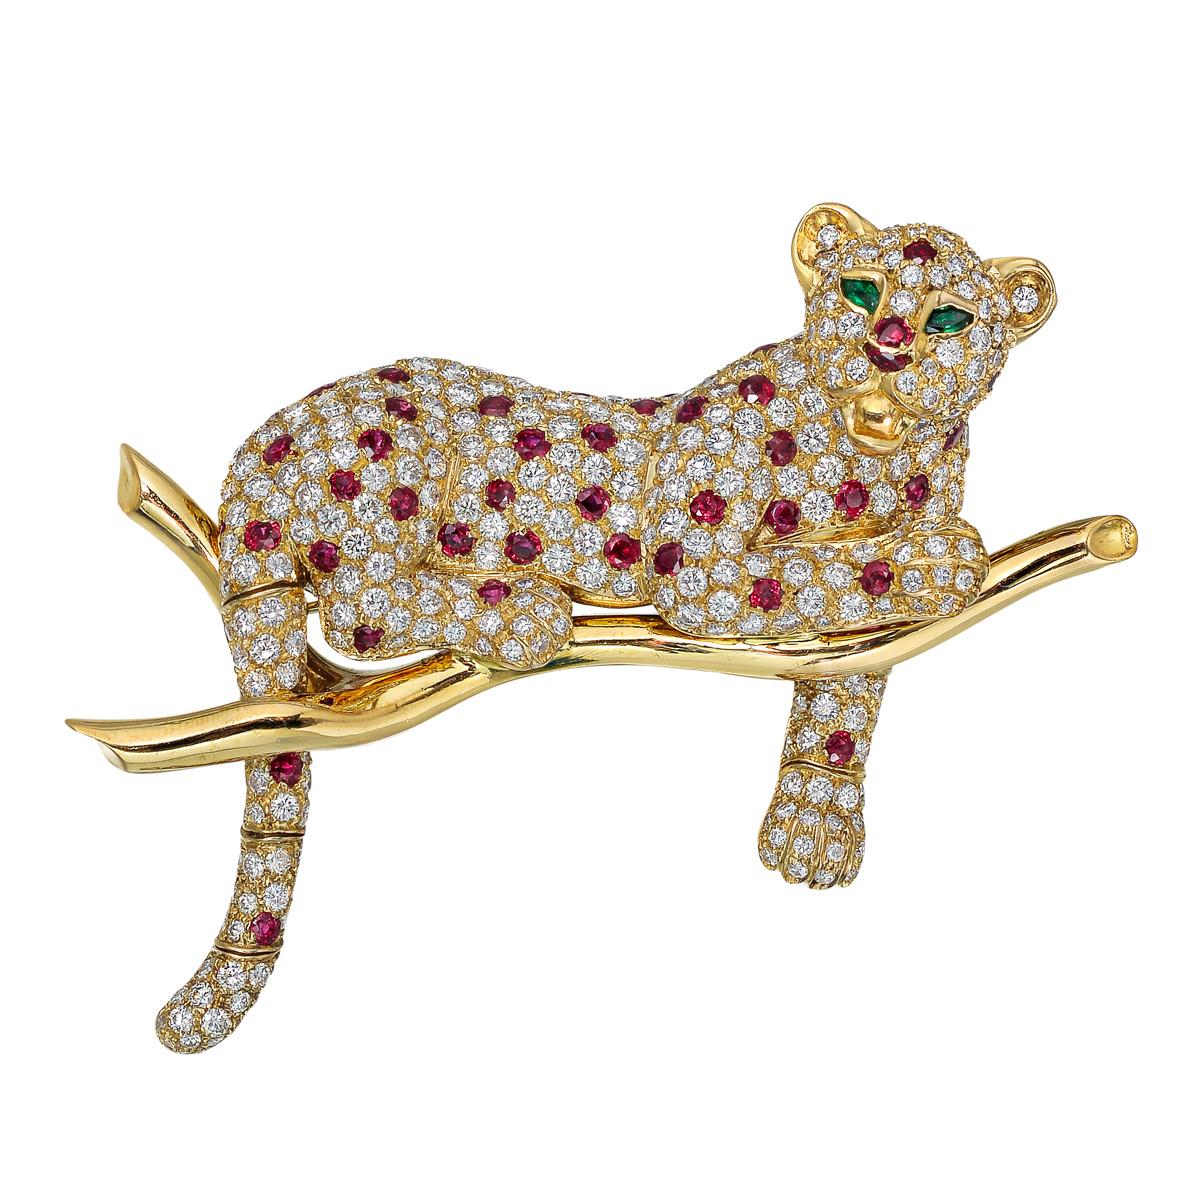 Vintage diamond, ruby and gold brooch, designed as a leopard lying atop a branch adorned with pavé-set fine colorless round-cut diamonds and round faceted ruby 'spots', as well as pear-shaped emerald eyes, mounted in 18k yellow gold, the leopard's